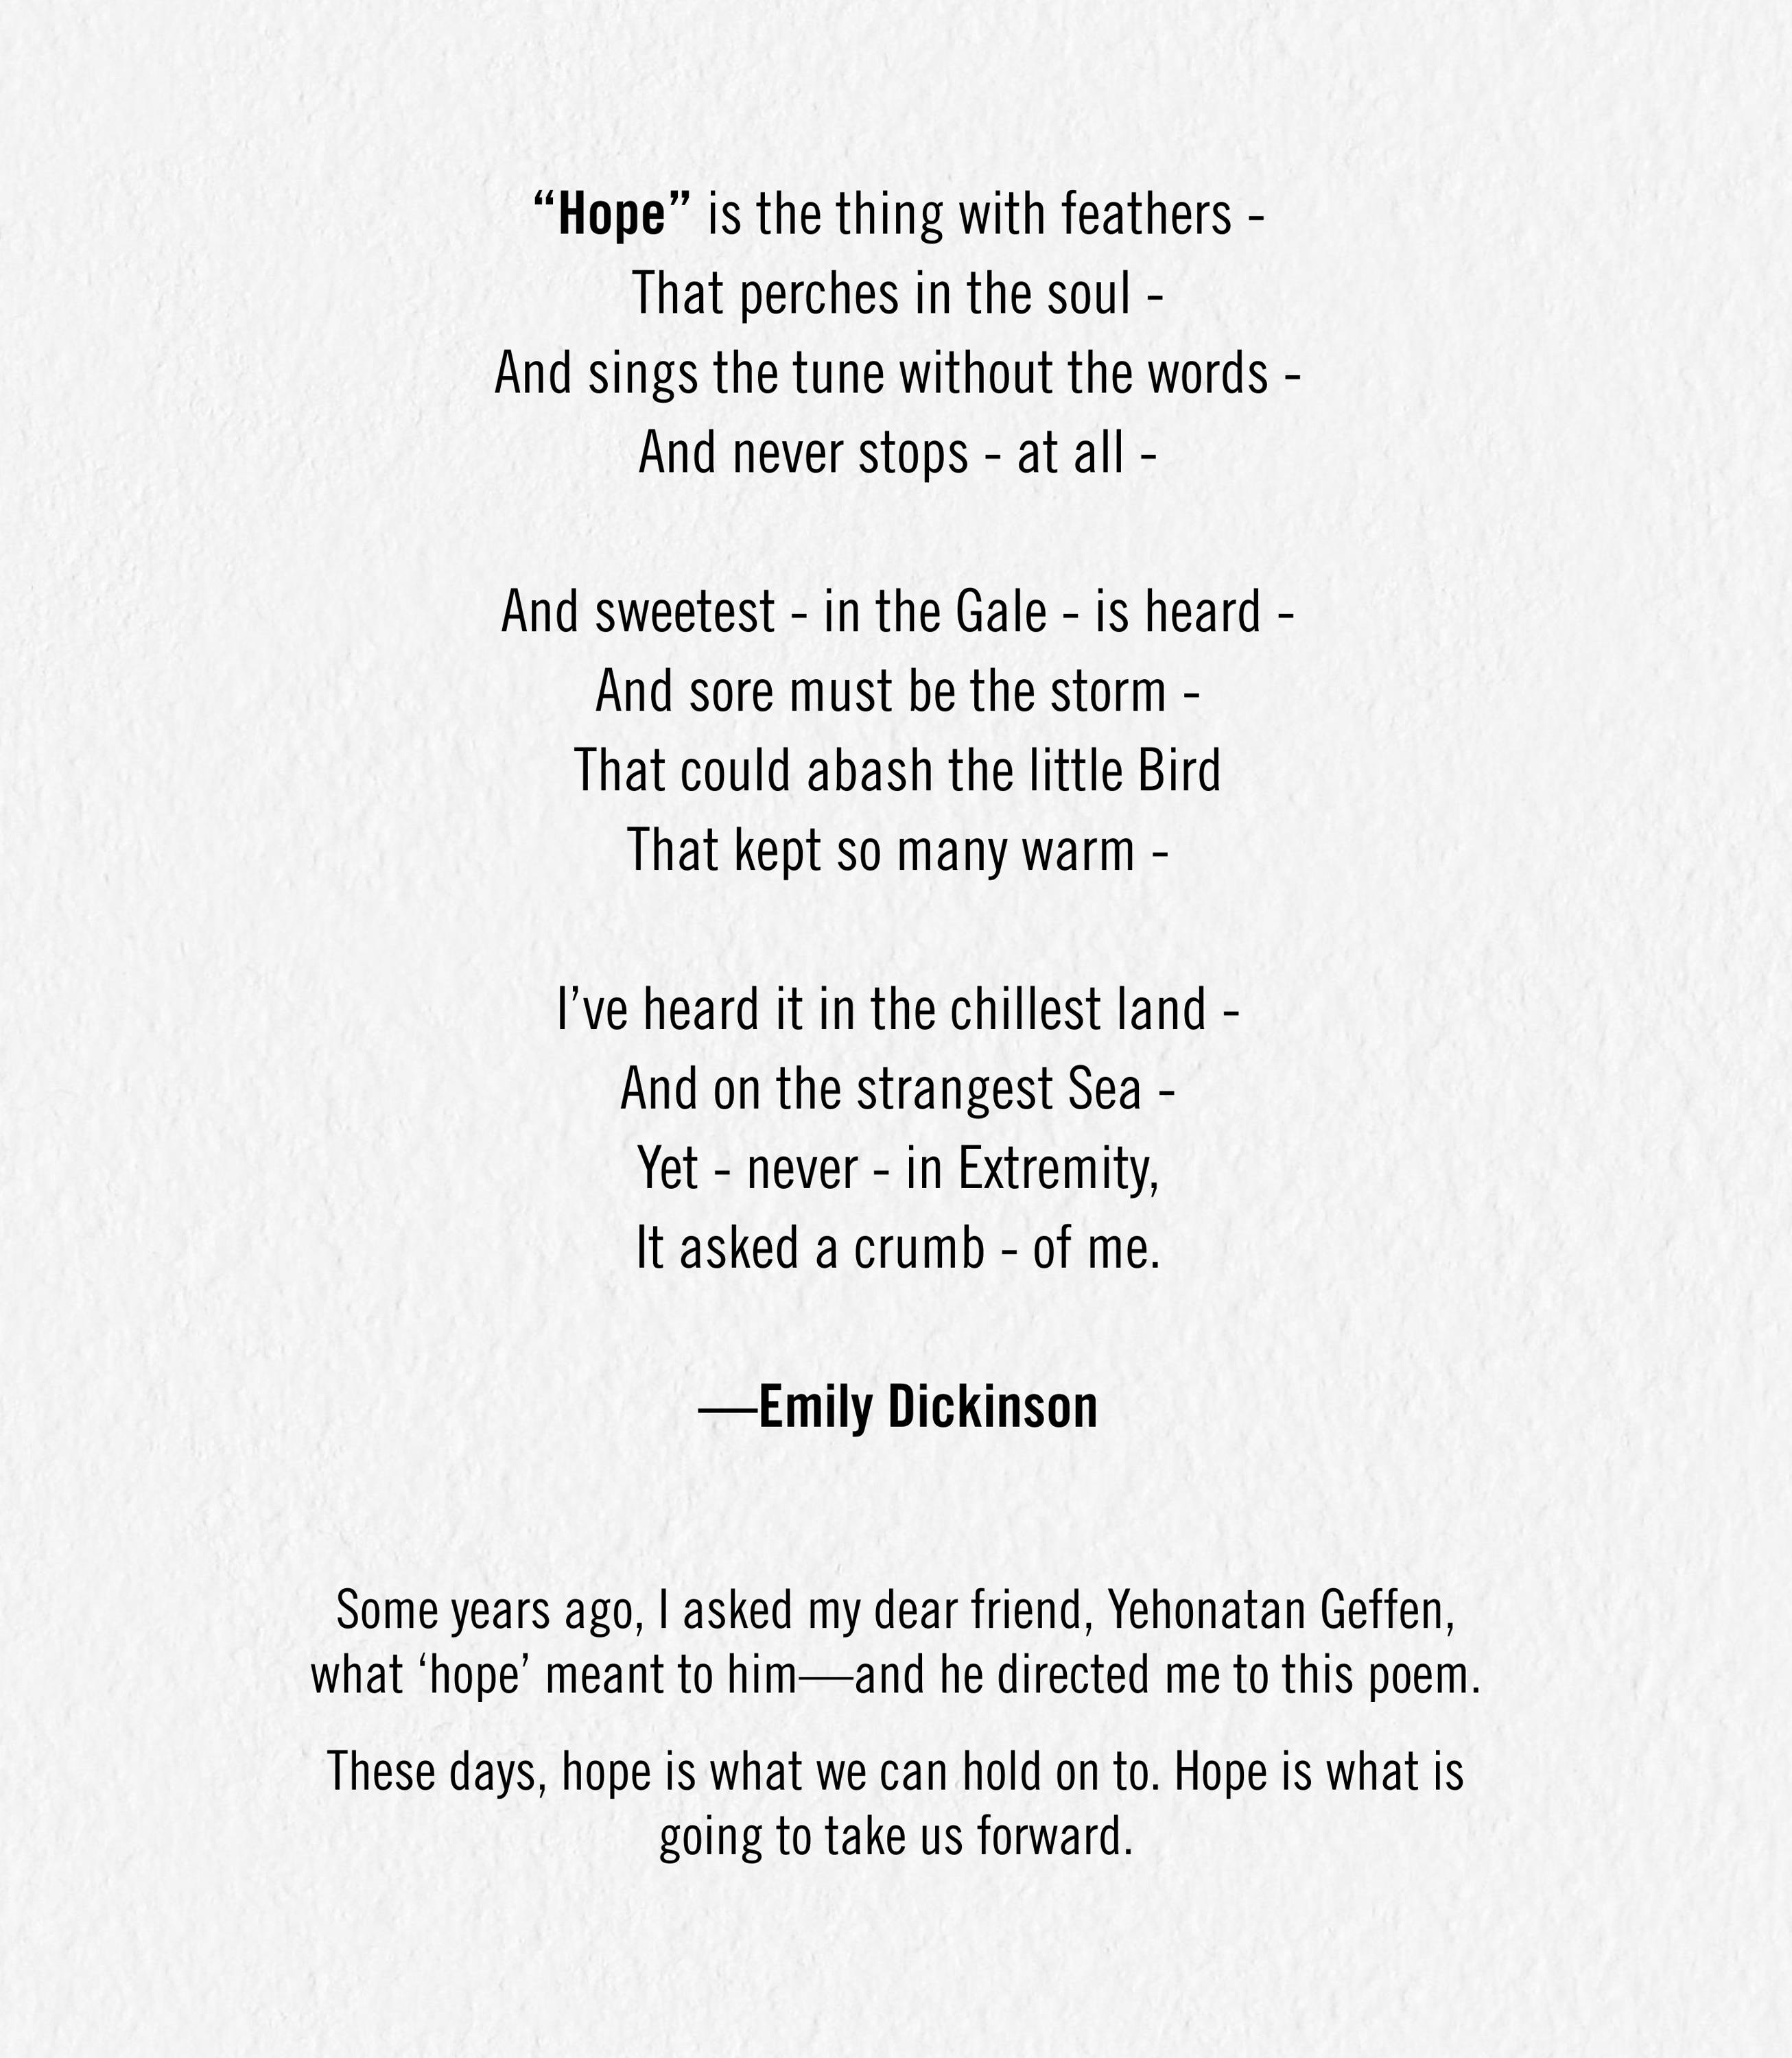 A poem about hope by Emily Dickinson